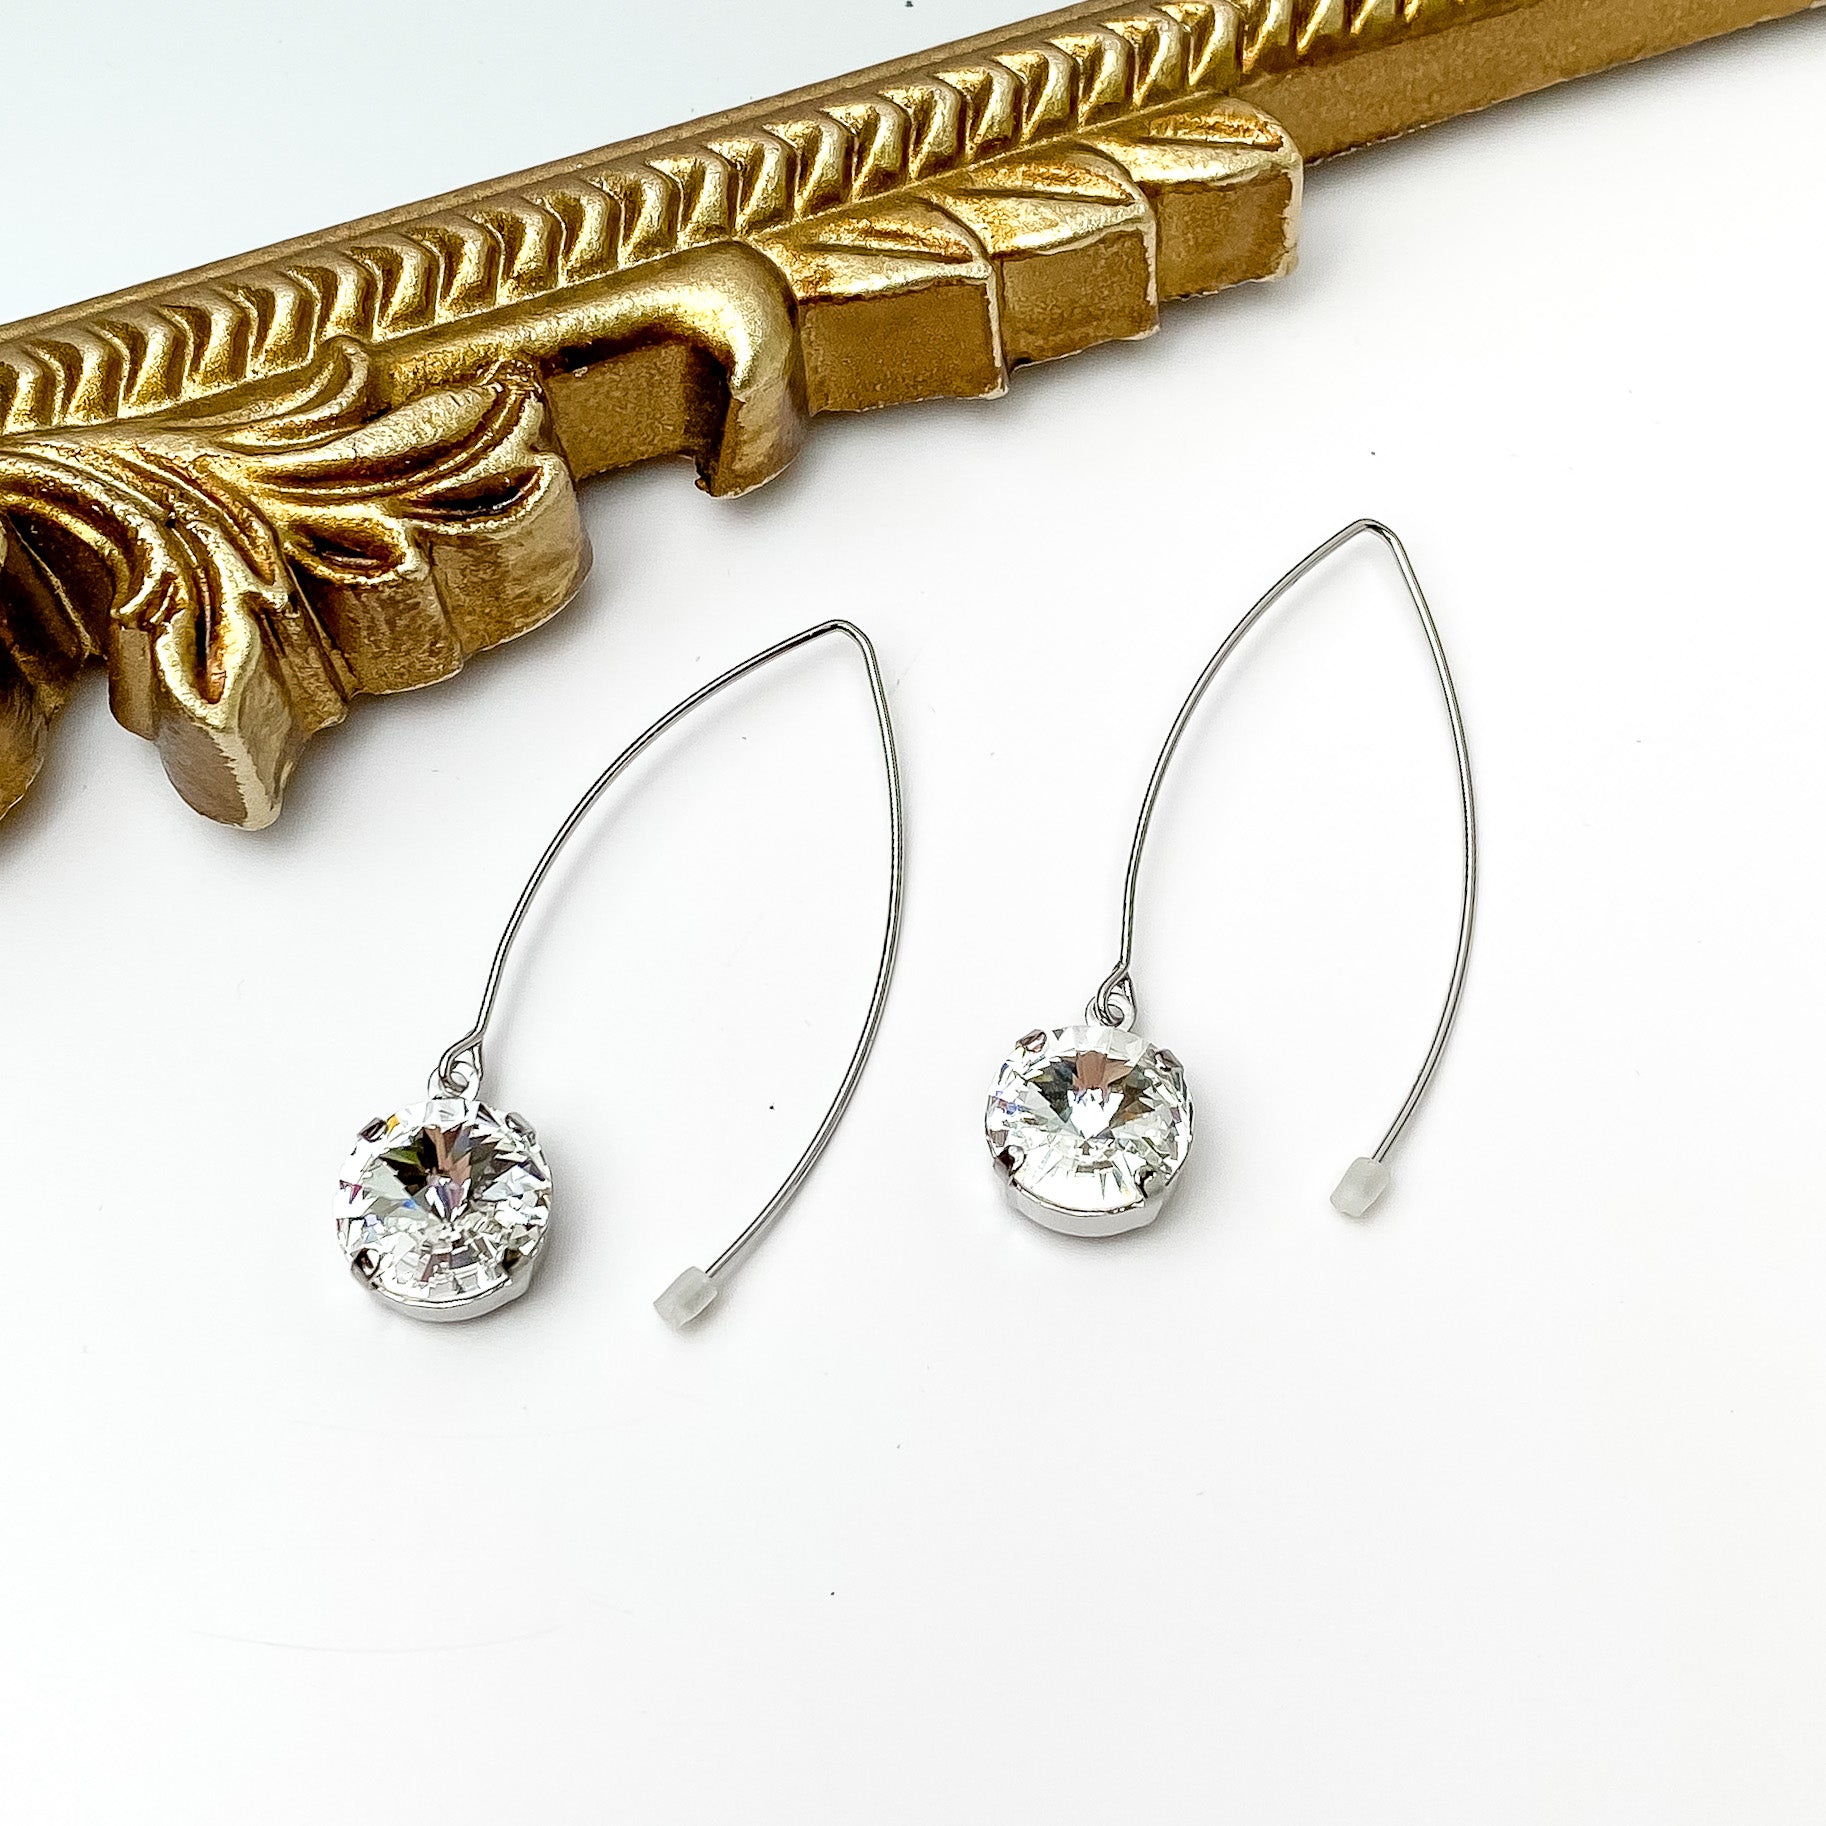 Silver, kidney wire dangle earrings. These earrings include a round clear crystal drop. These earrings are pictured in front of a gold mirror on a white background. 